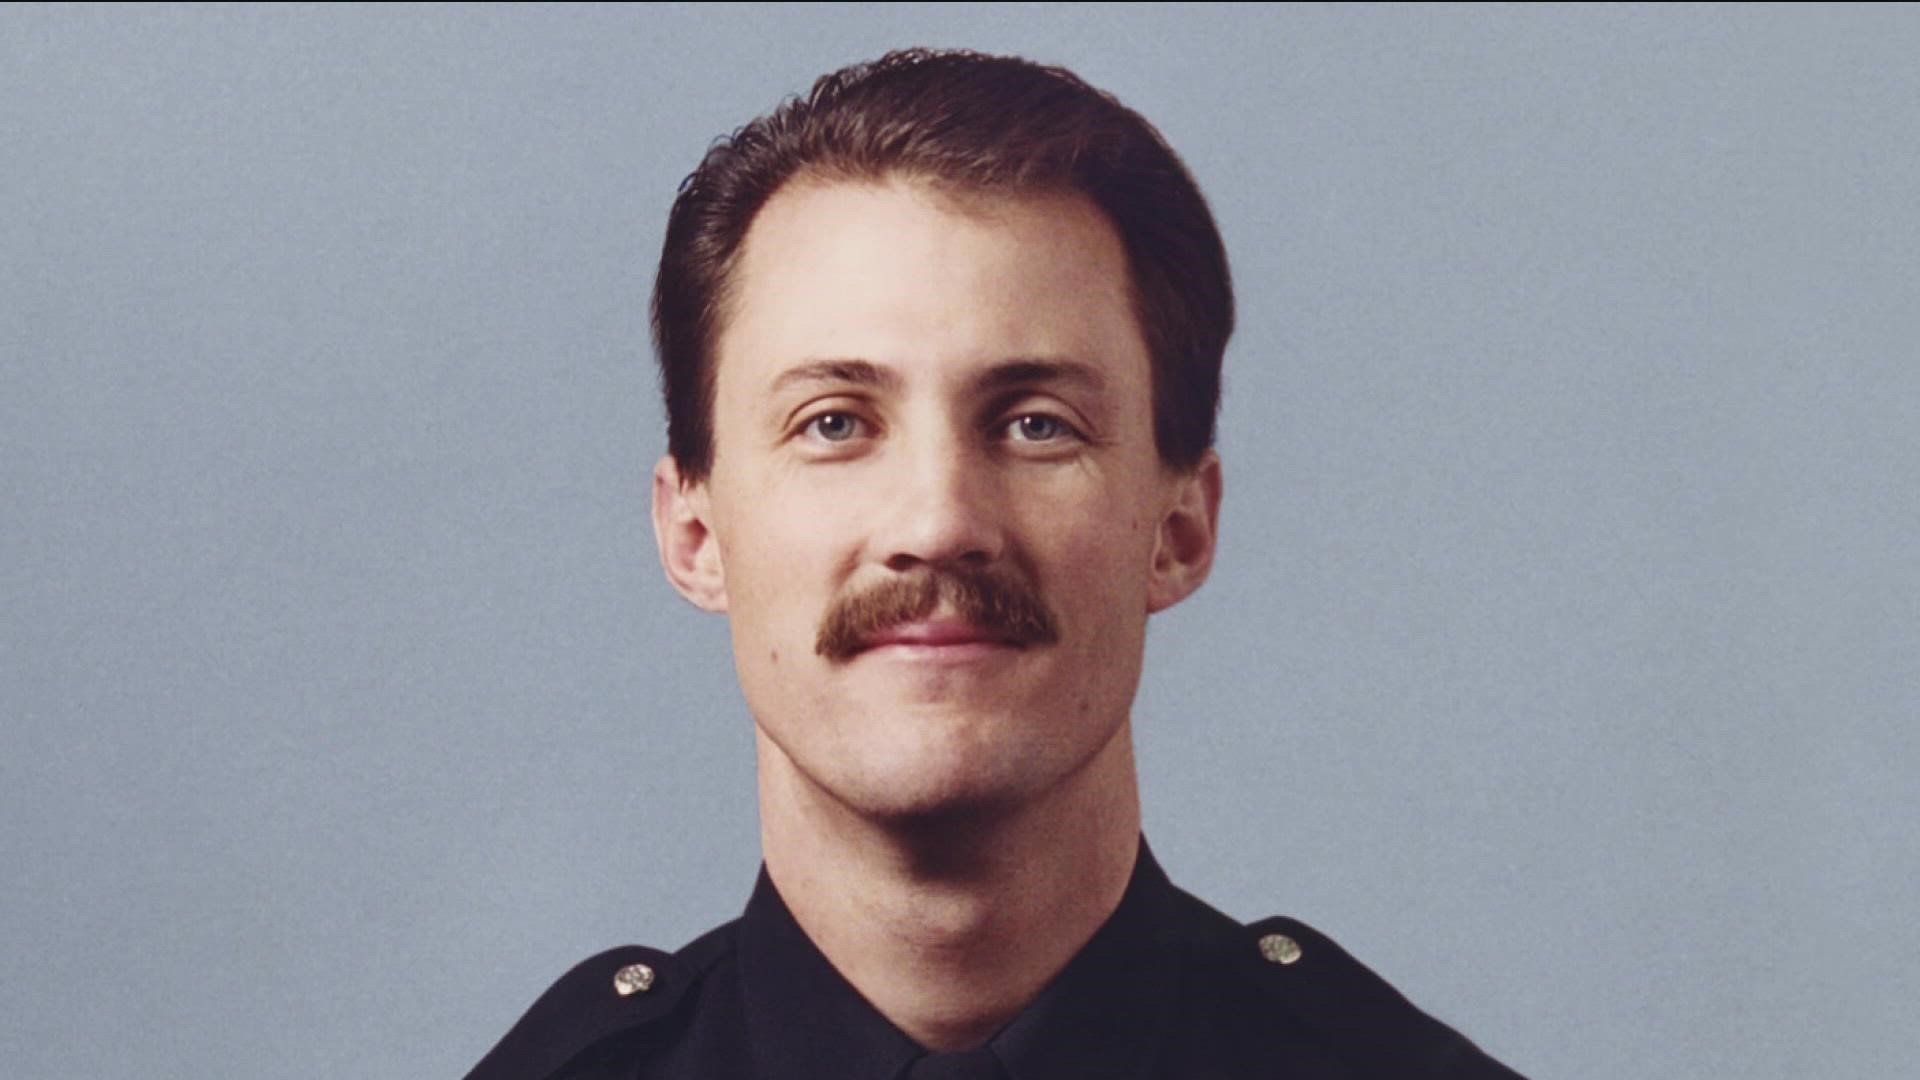 Tuesday marks 25 years since Mark Stall was killed in the line of duty. Each year on Sept. 20, the Boise Police Department comes together to remember Stall.